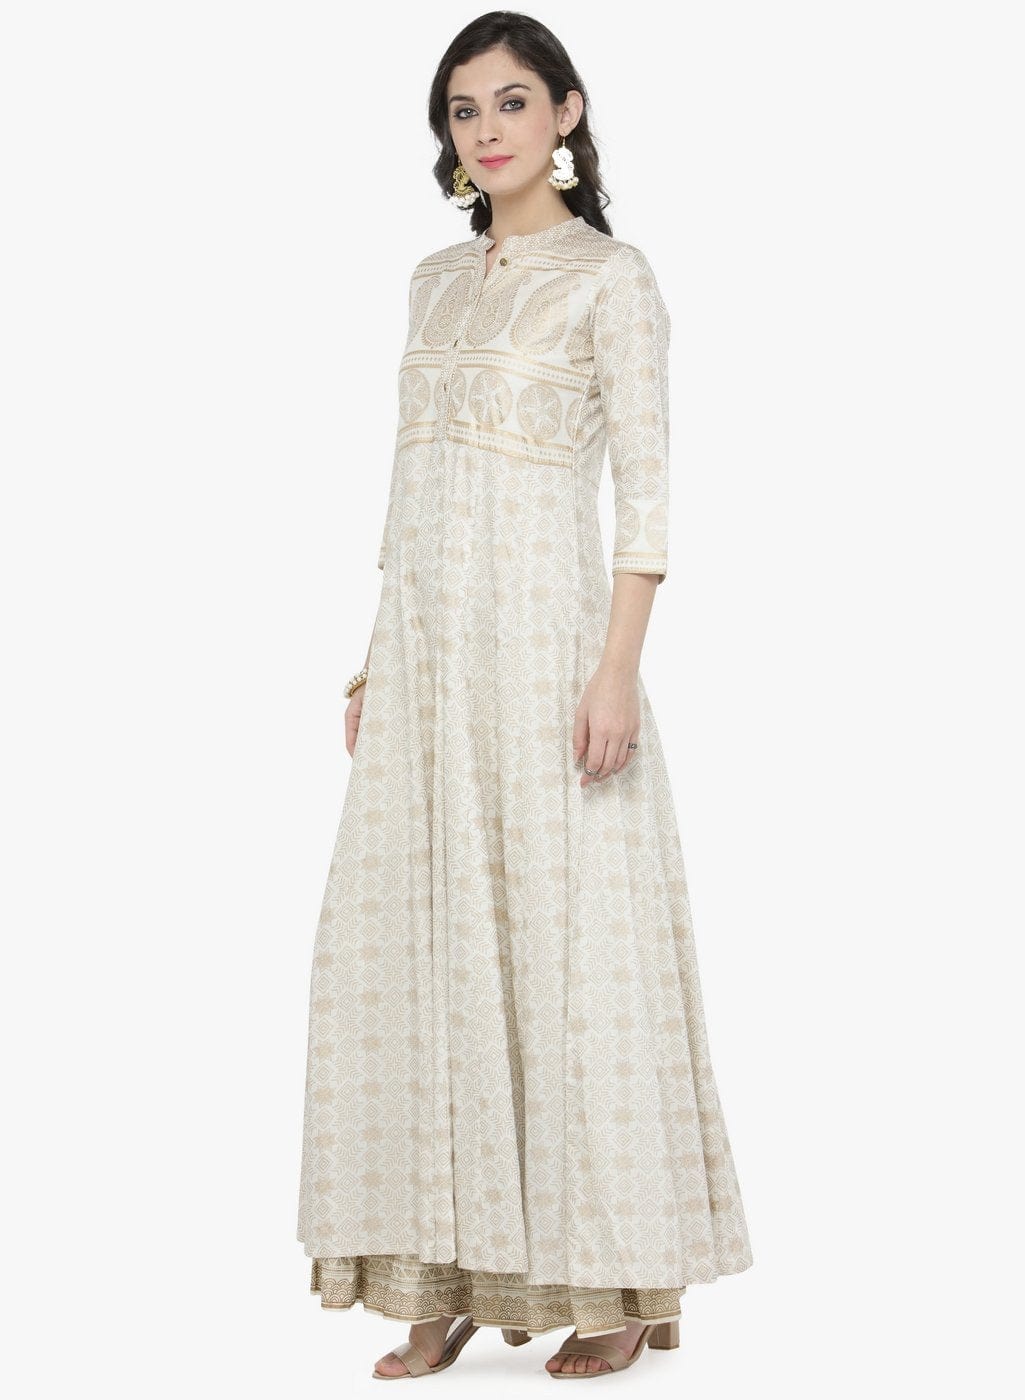 Women's Off-White Printed Maxi Dress - Final Clearance Sale